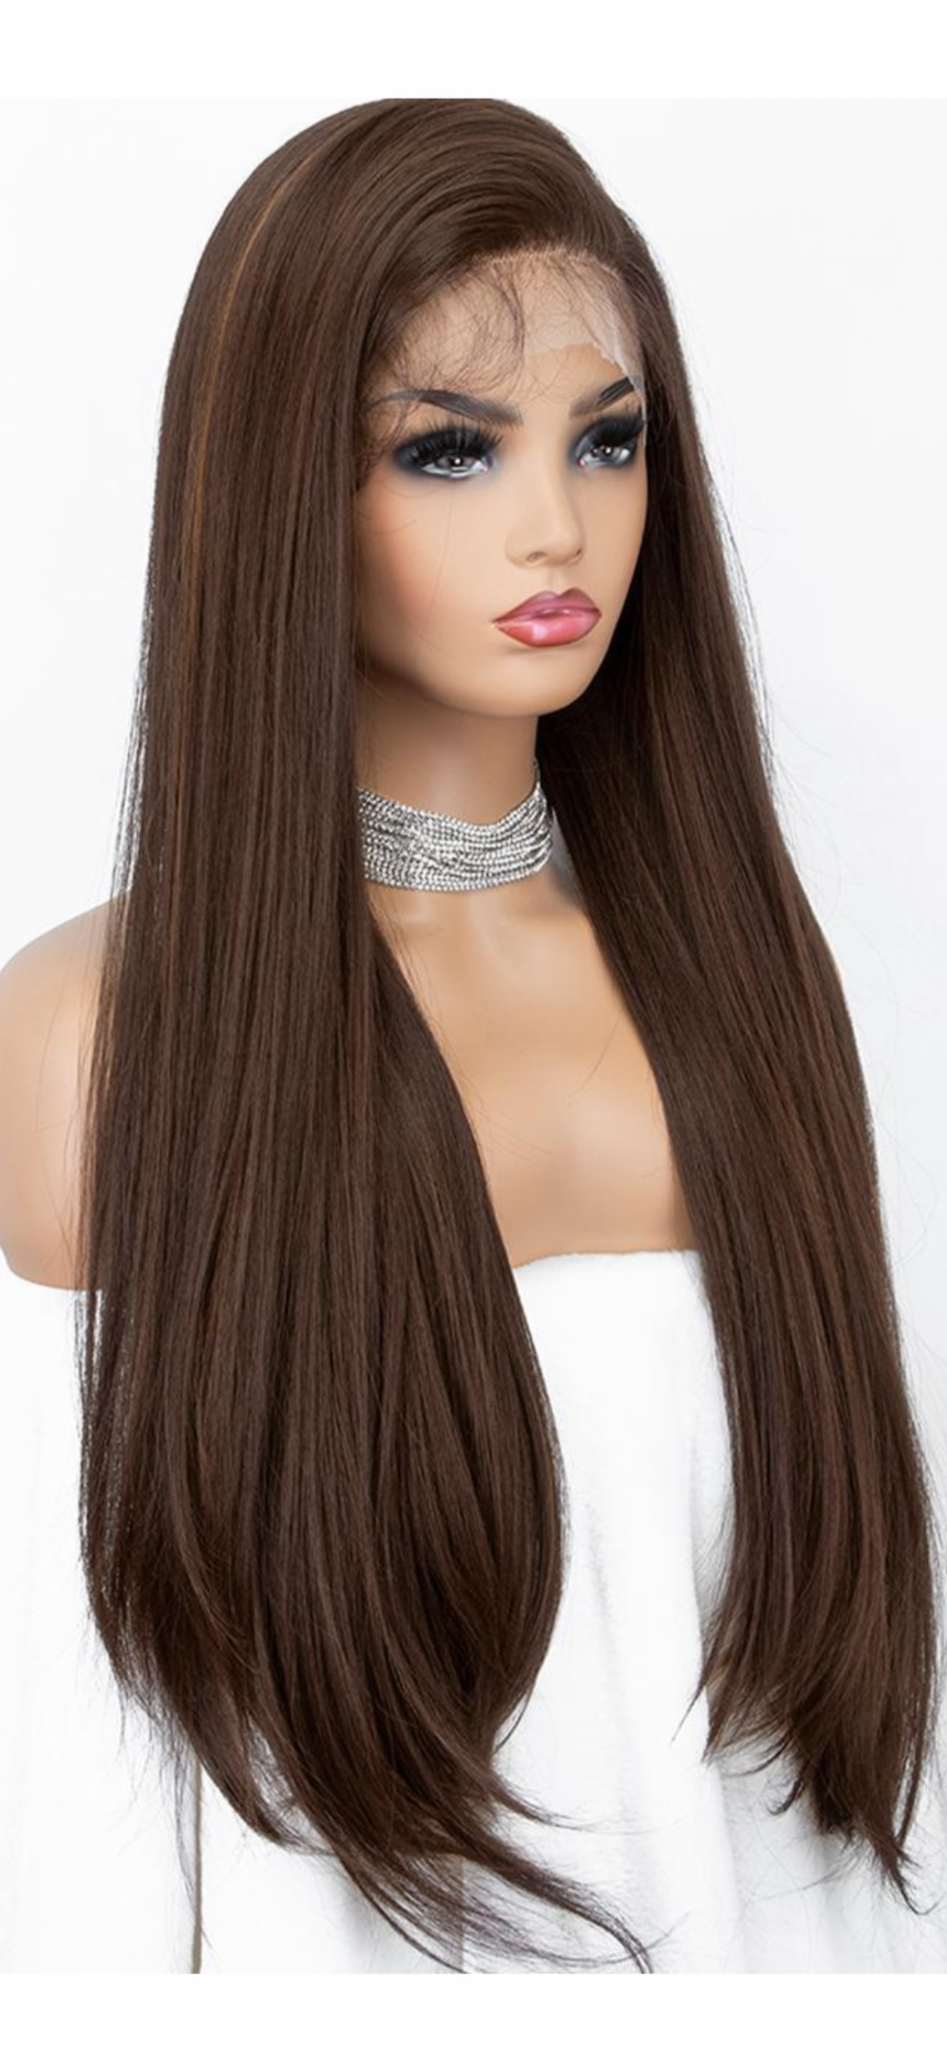 Amelia Blended Lace Wig